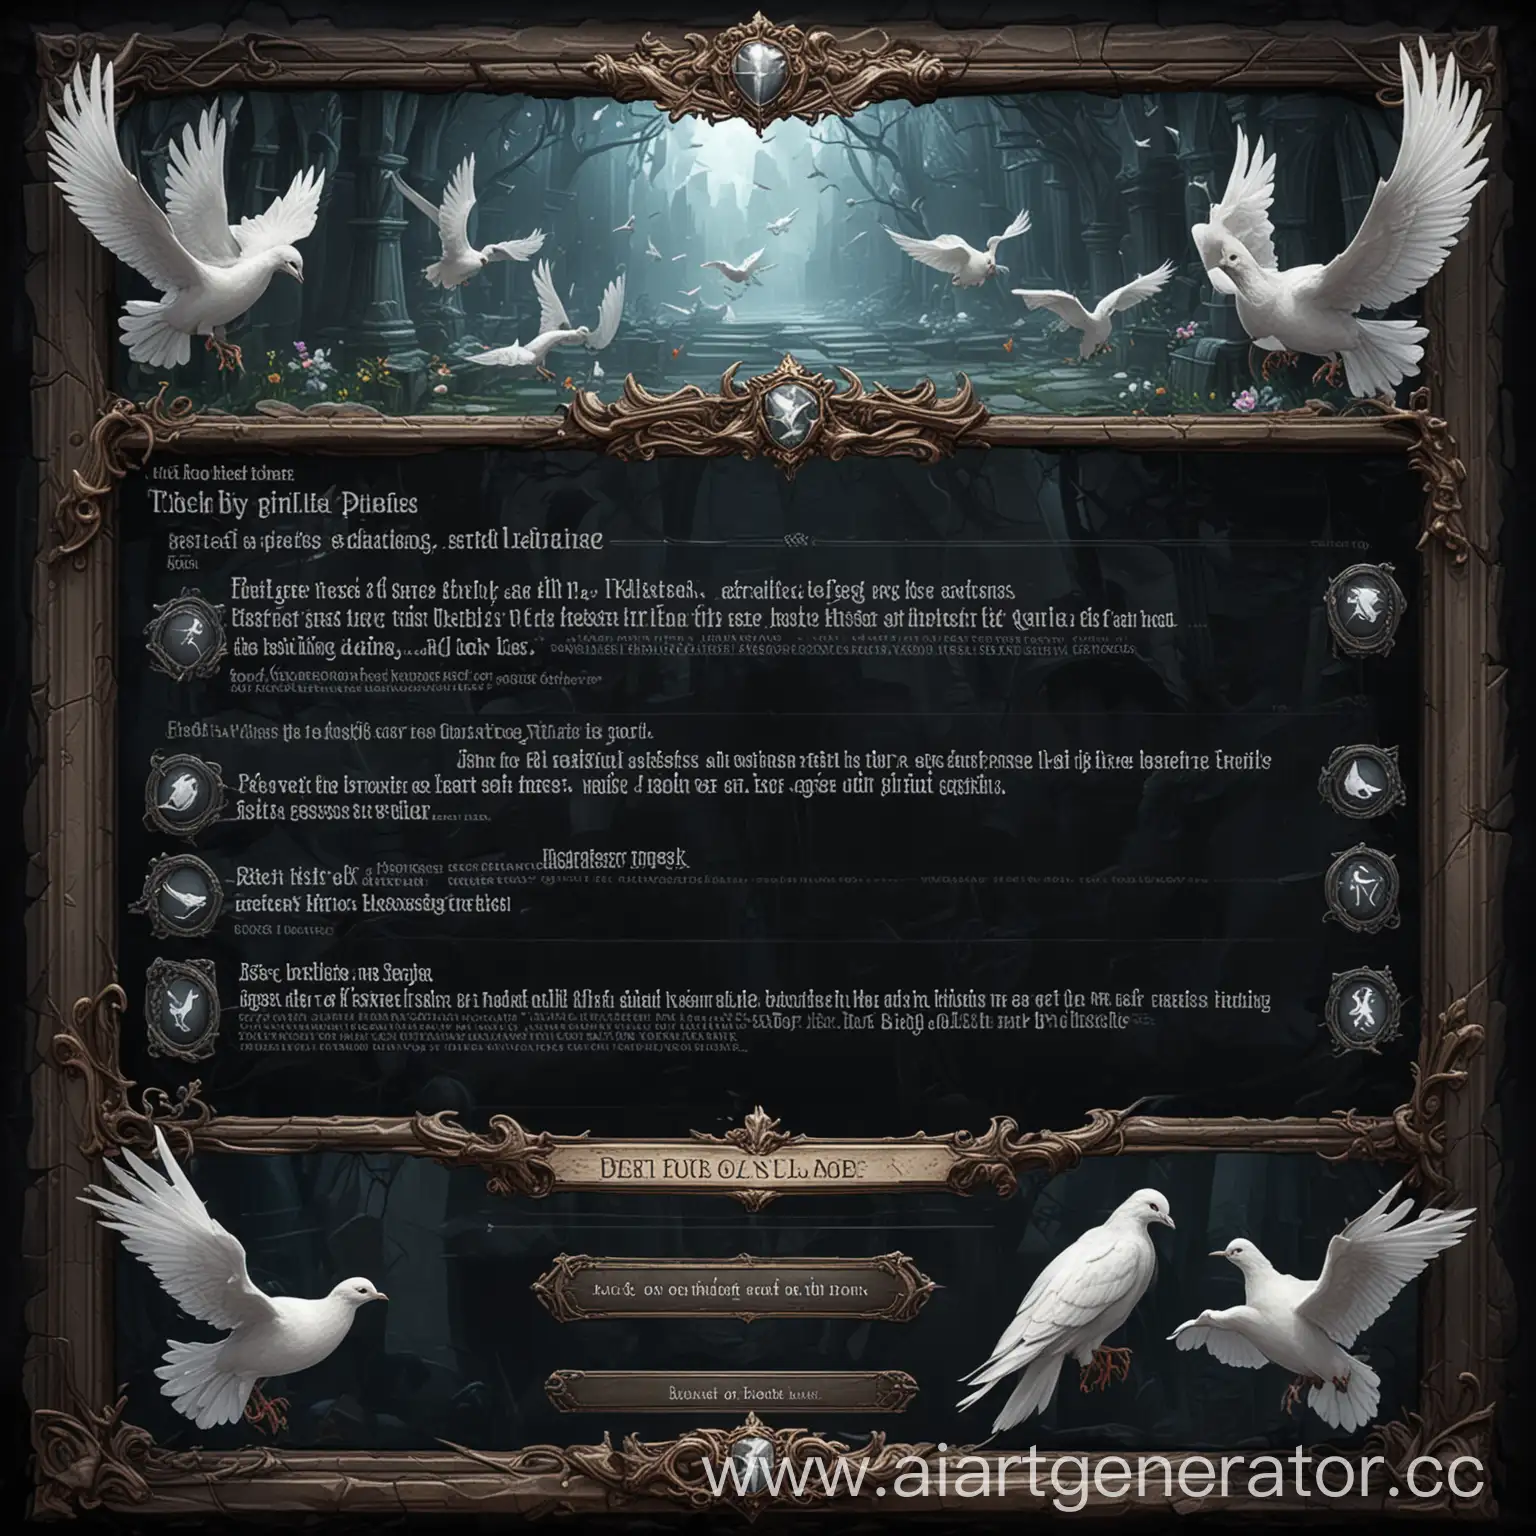 Dark-Fantasy-TextBased-RPG-Dialog-Interface-with-White-Dove-Decoration